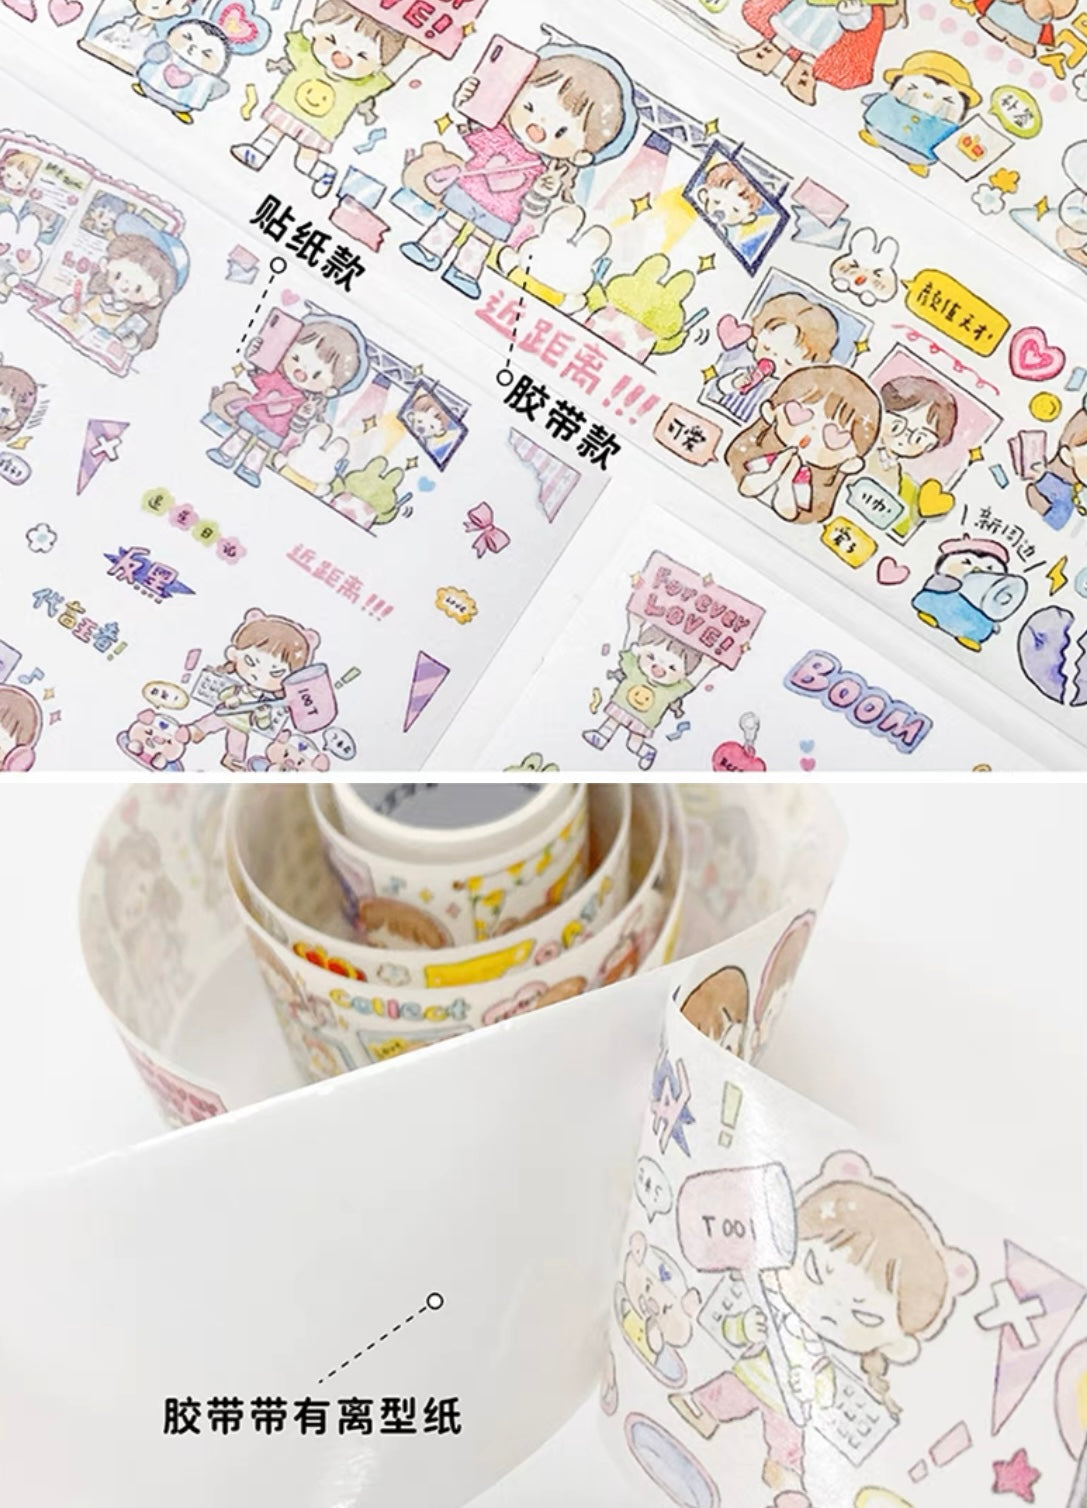 Molinta Chasing stars daily 「forever love」 washitape and sticker pack